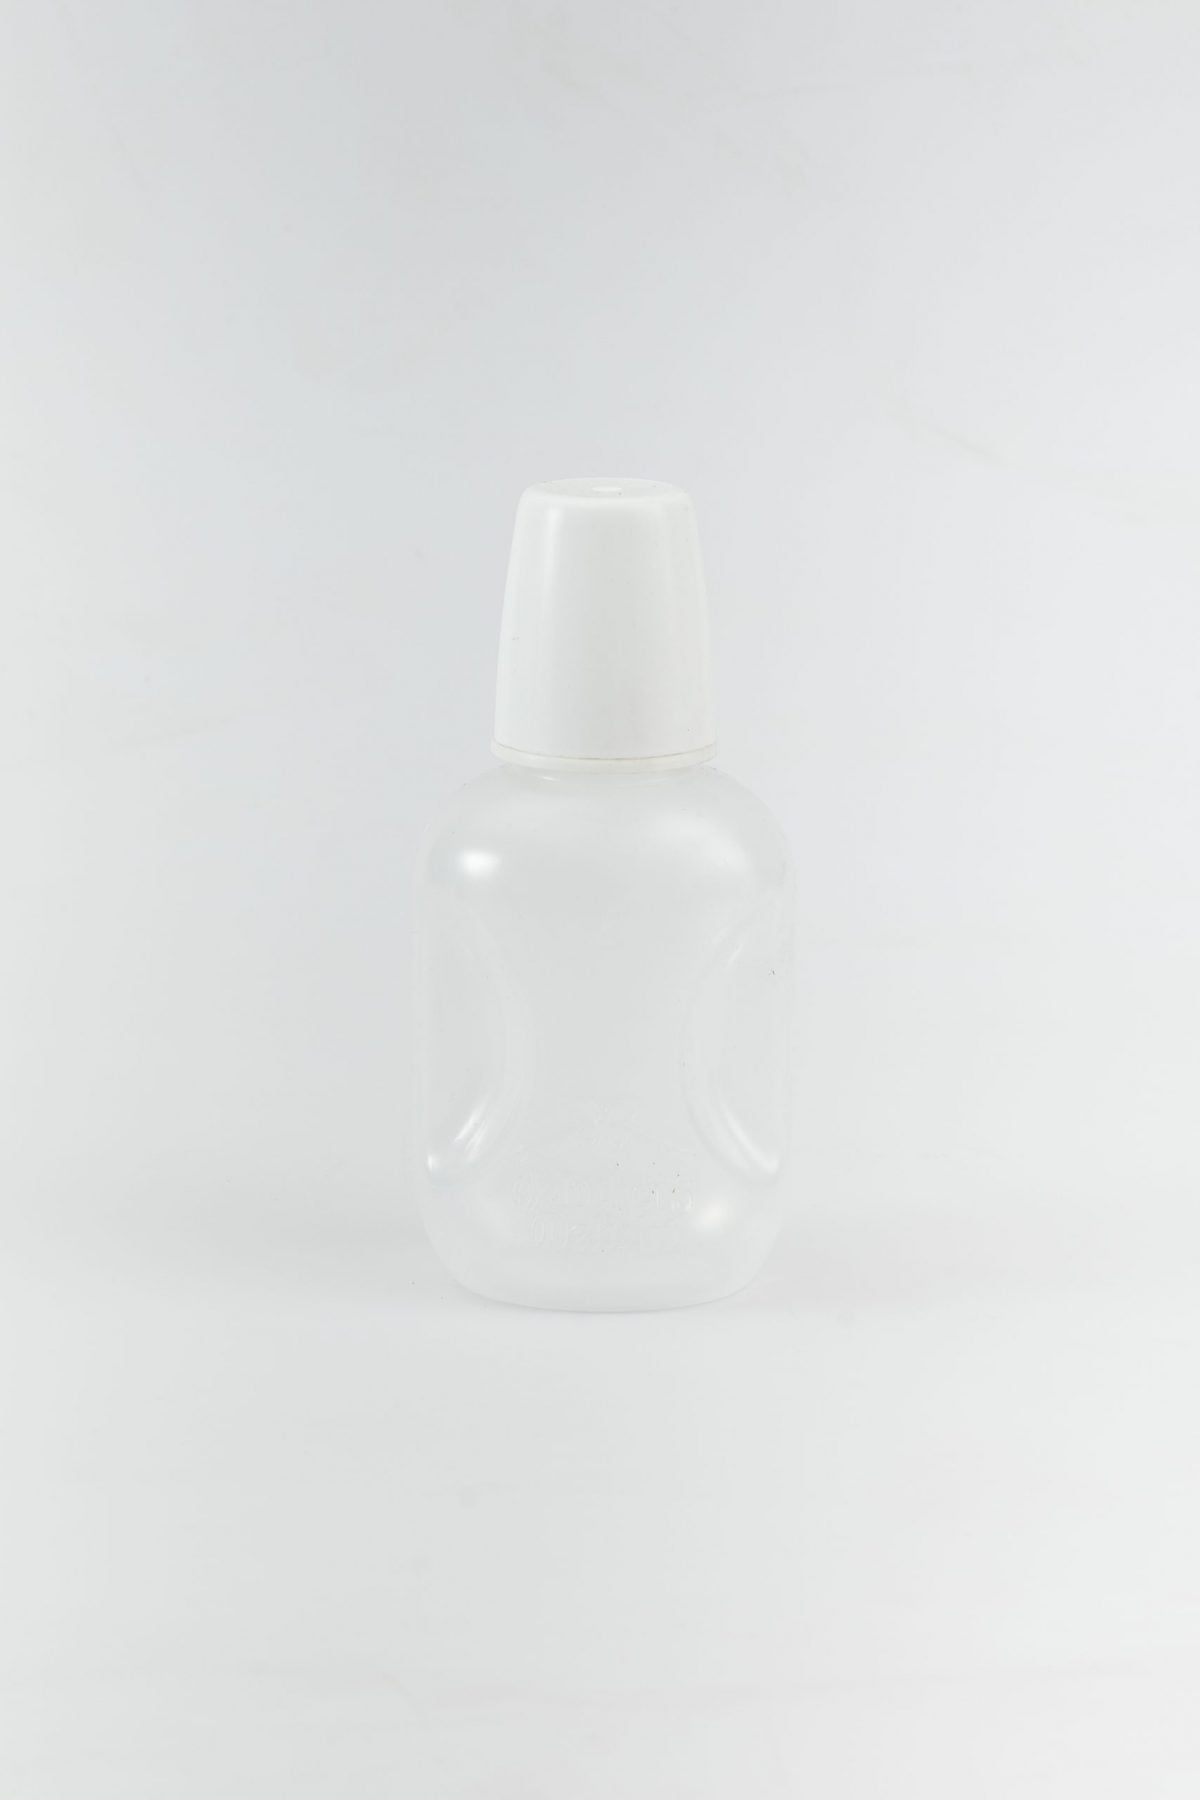 Mother's Delight Baby Bottle with Finger Grippa 1x250ml